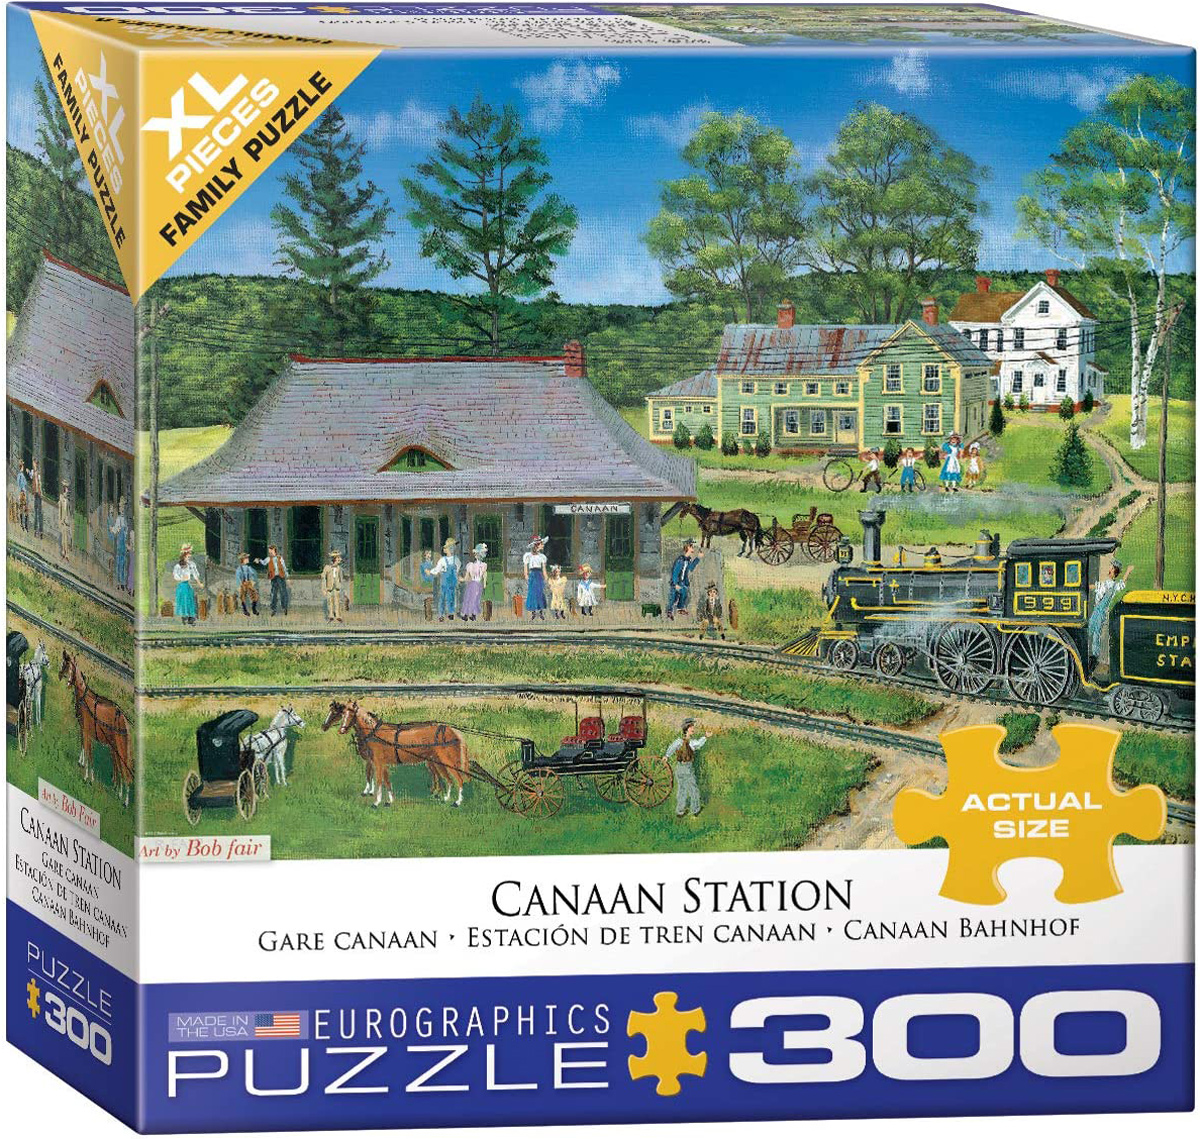 Canaan Station